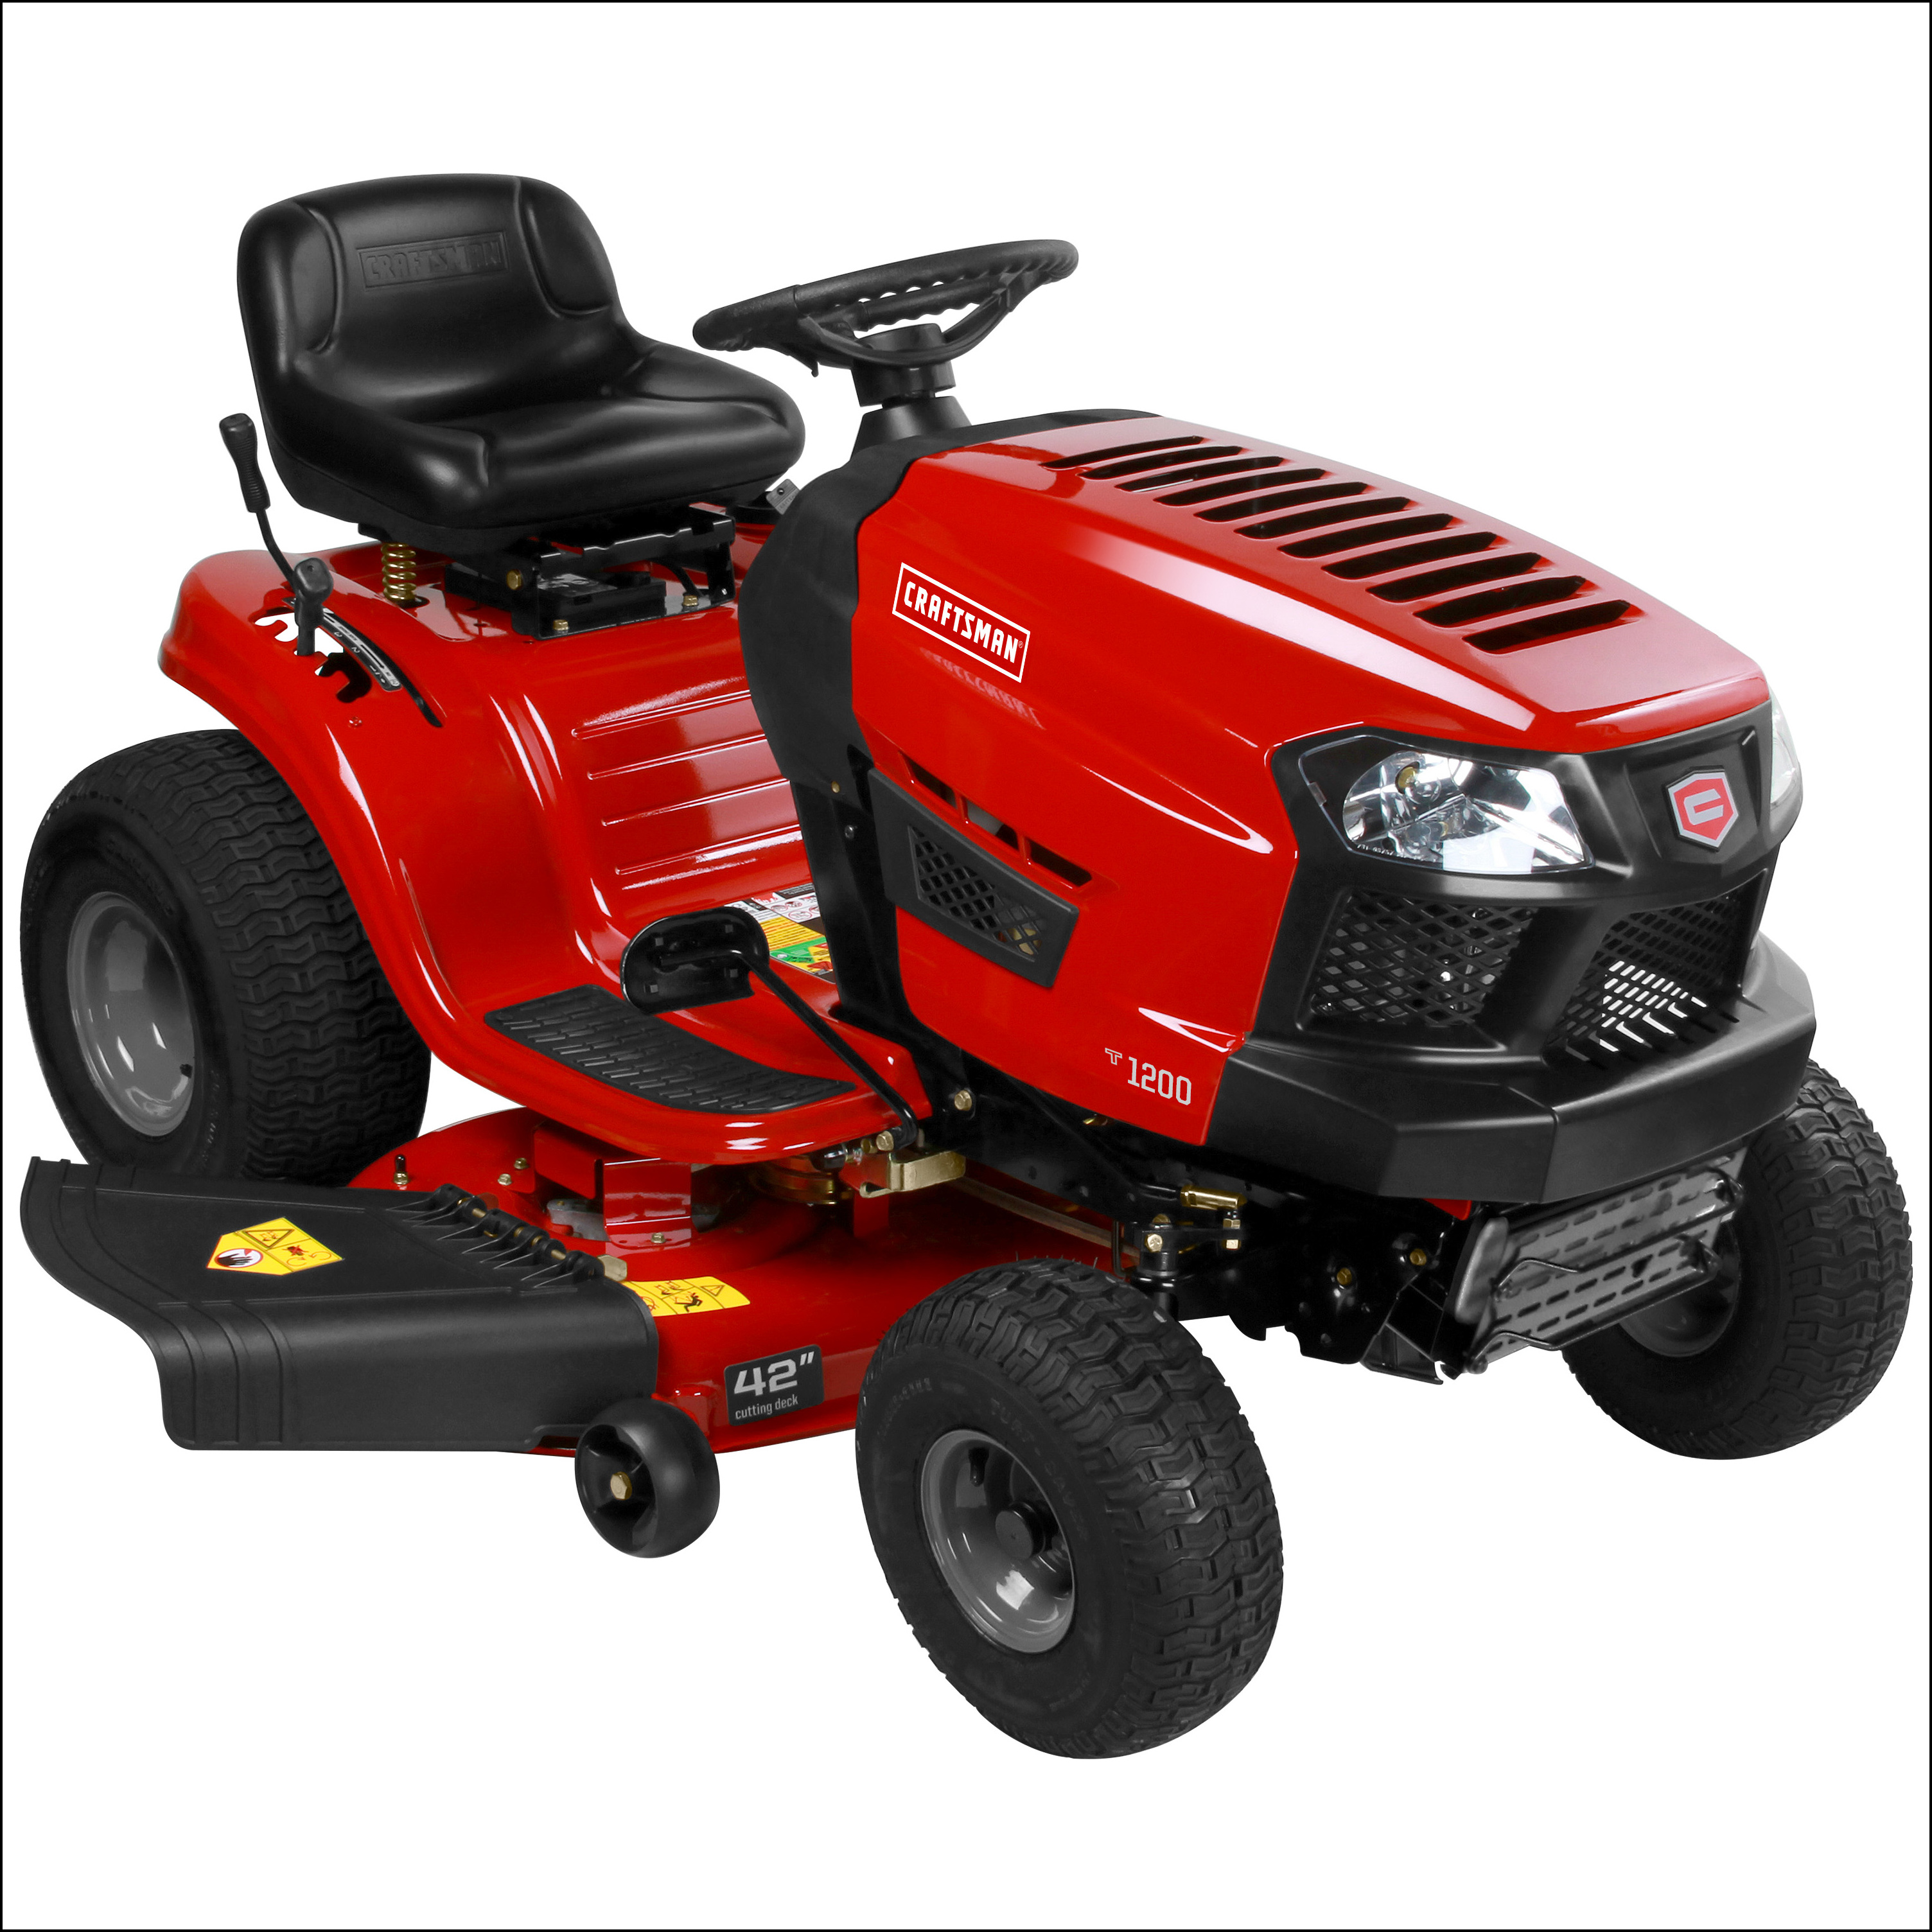 Sears Outlet Riding Lawn Mowers